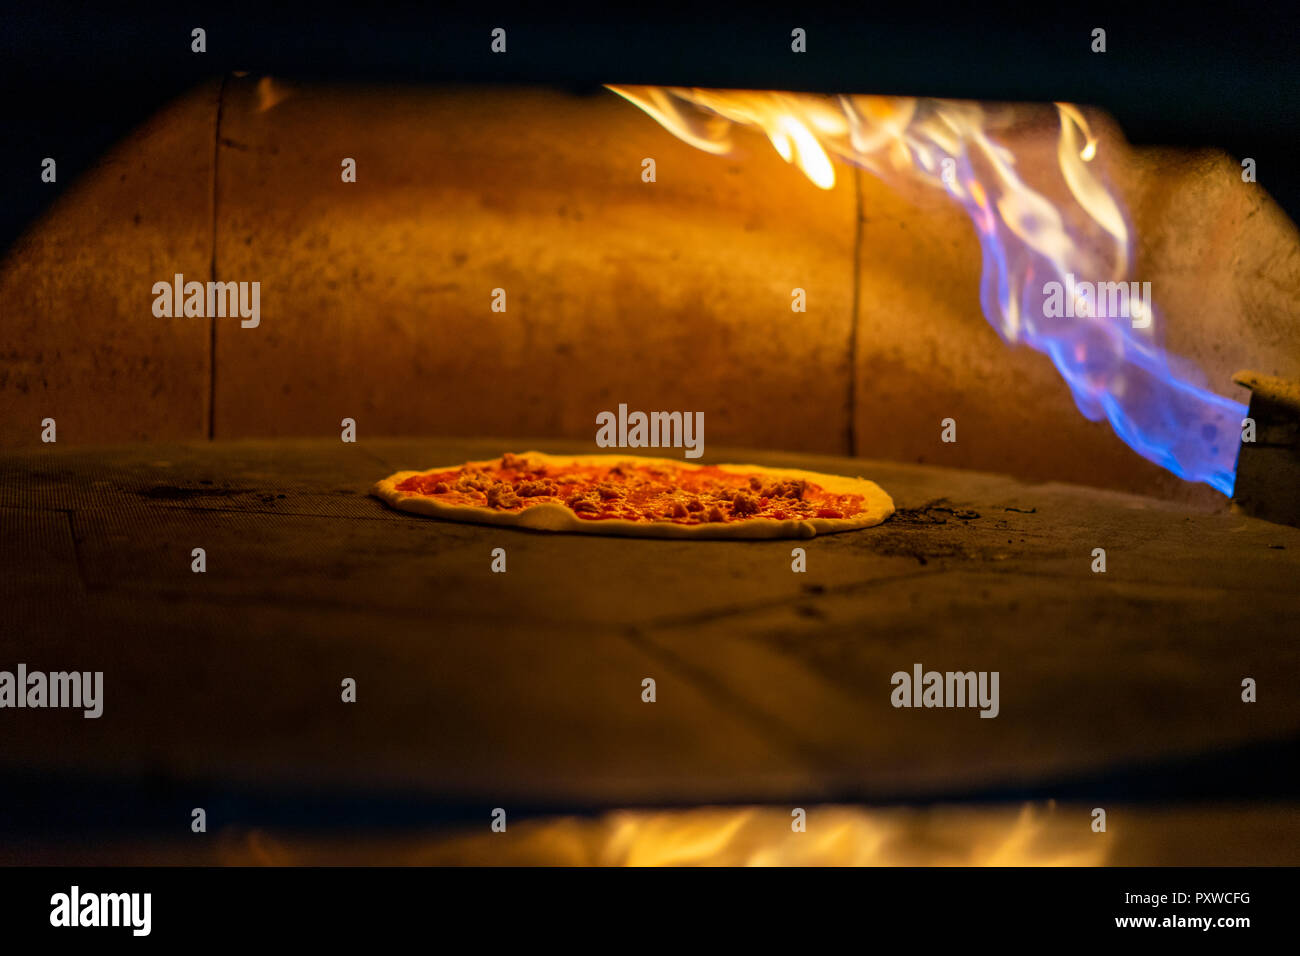 Pizza in oven with burning flame Stock Photo